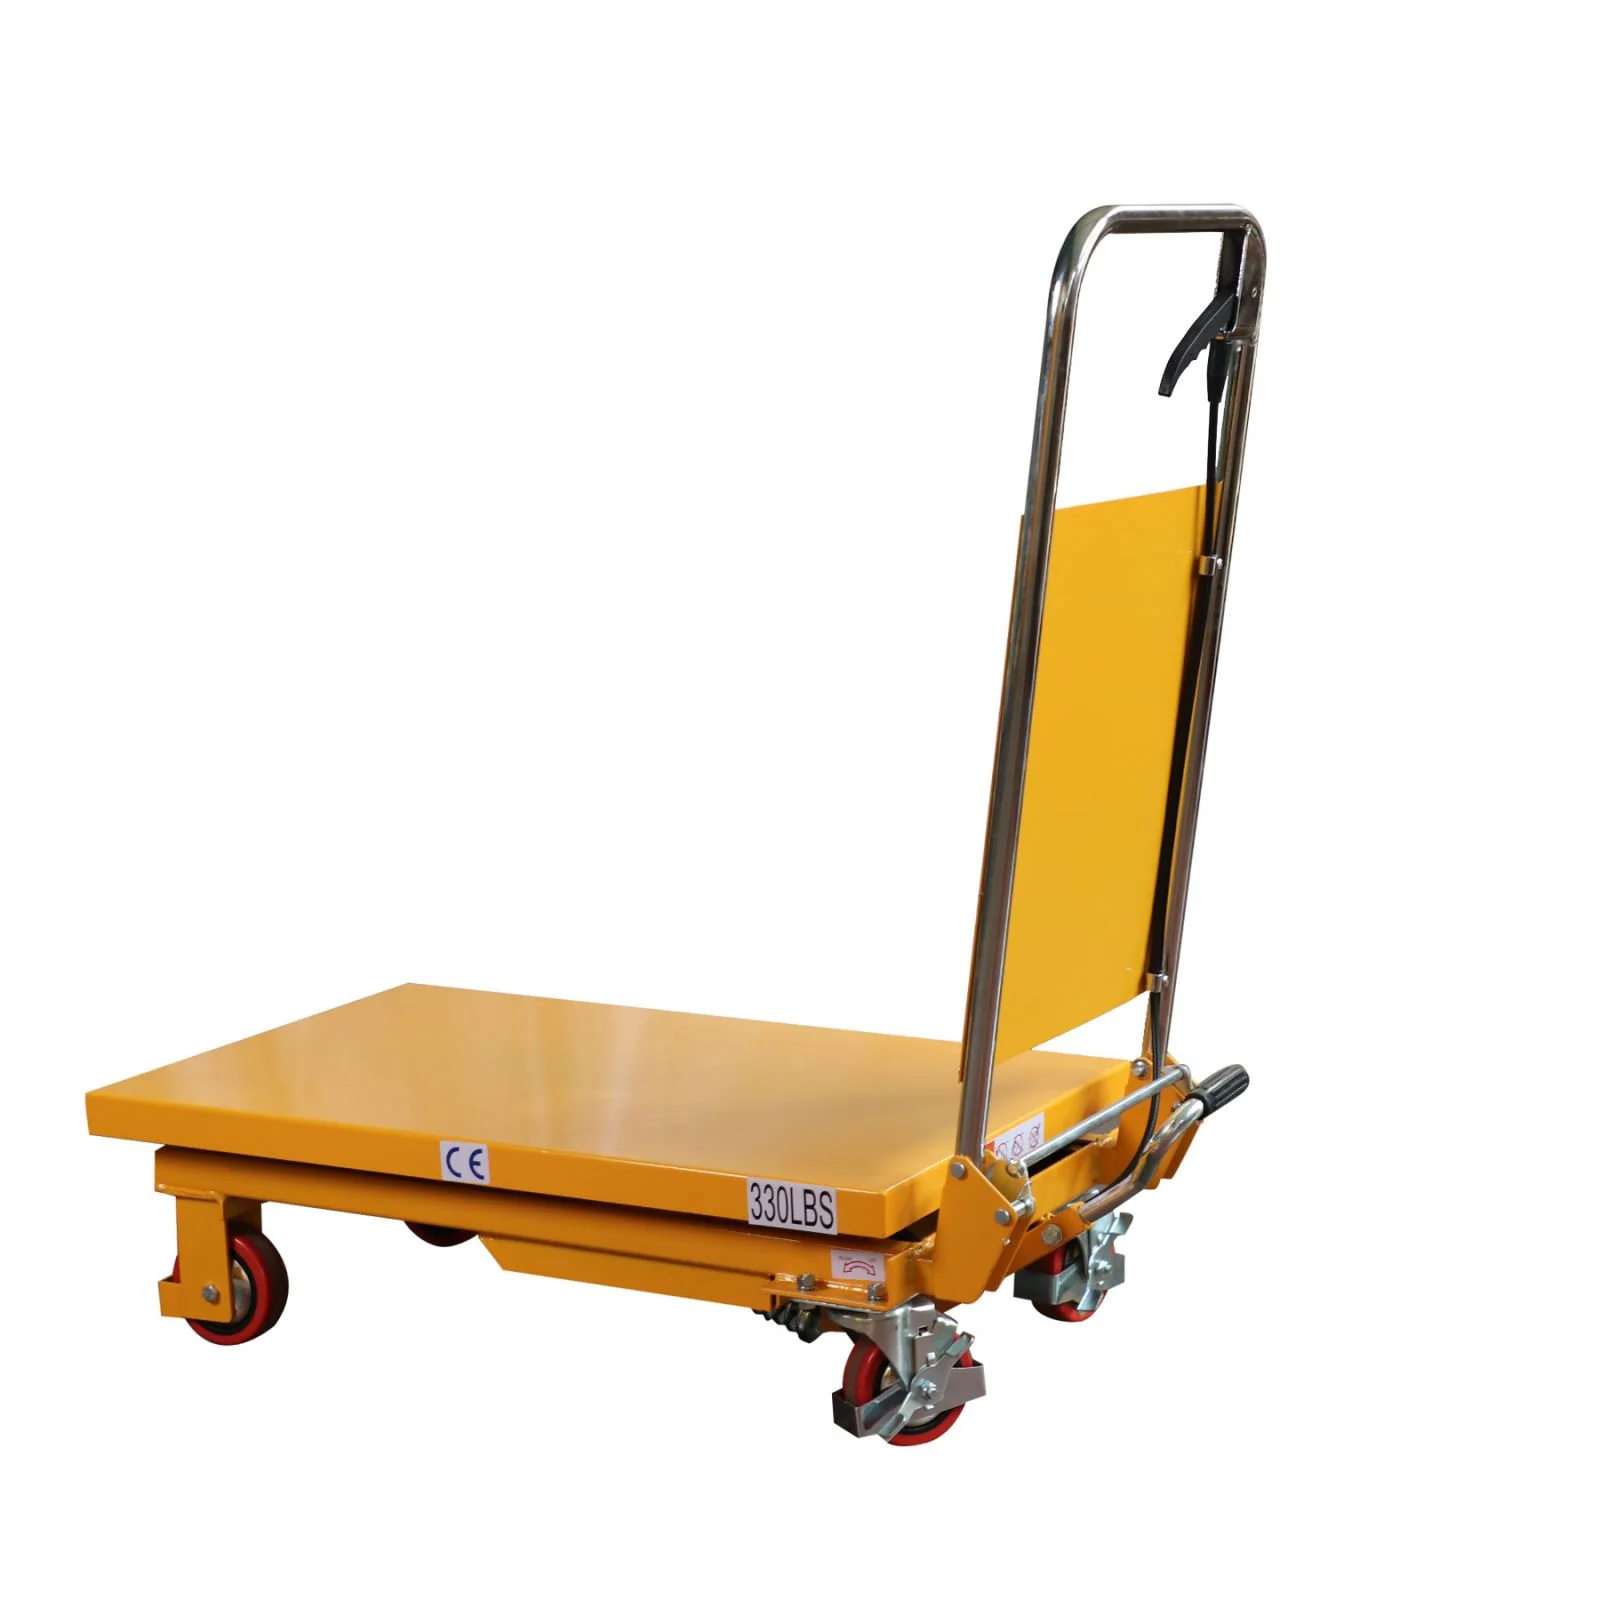 Apollolift, Apollolift A-2016 Single Scissor Lift Table 330 lbs. Capacity 29" Lifting Height SP150 New